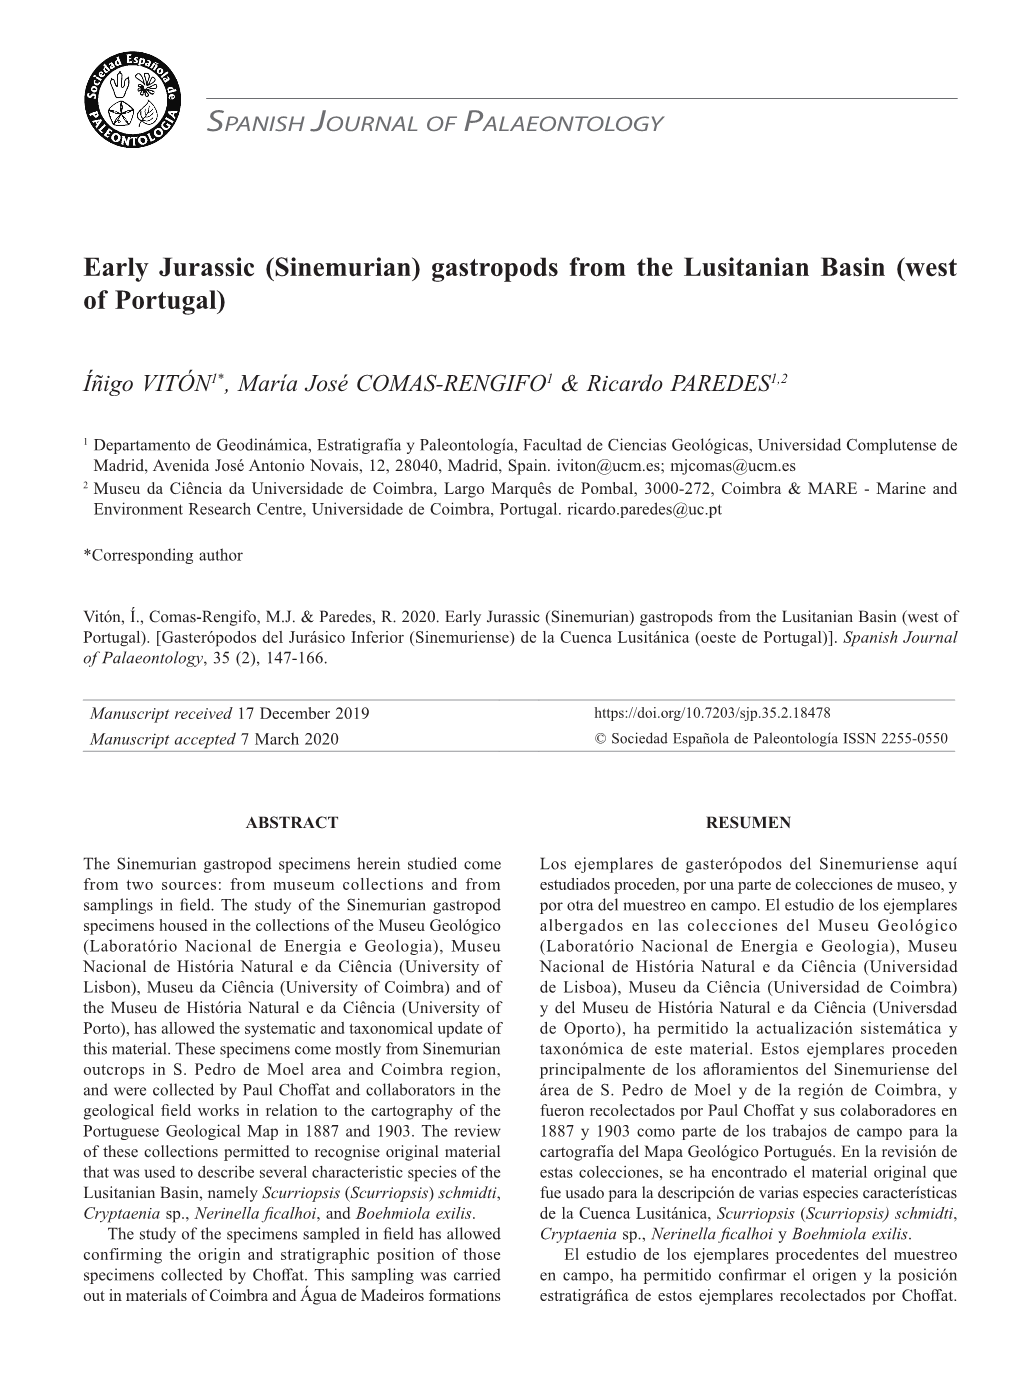 Early Jurassic (Sinemurian) Gastropods from the Lusitanian Basin (West of Portugal)